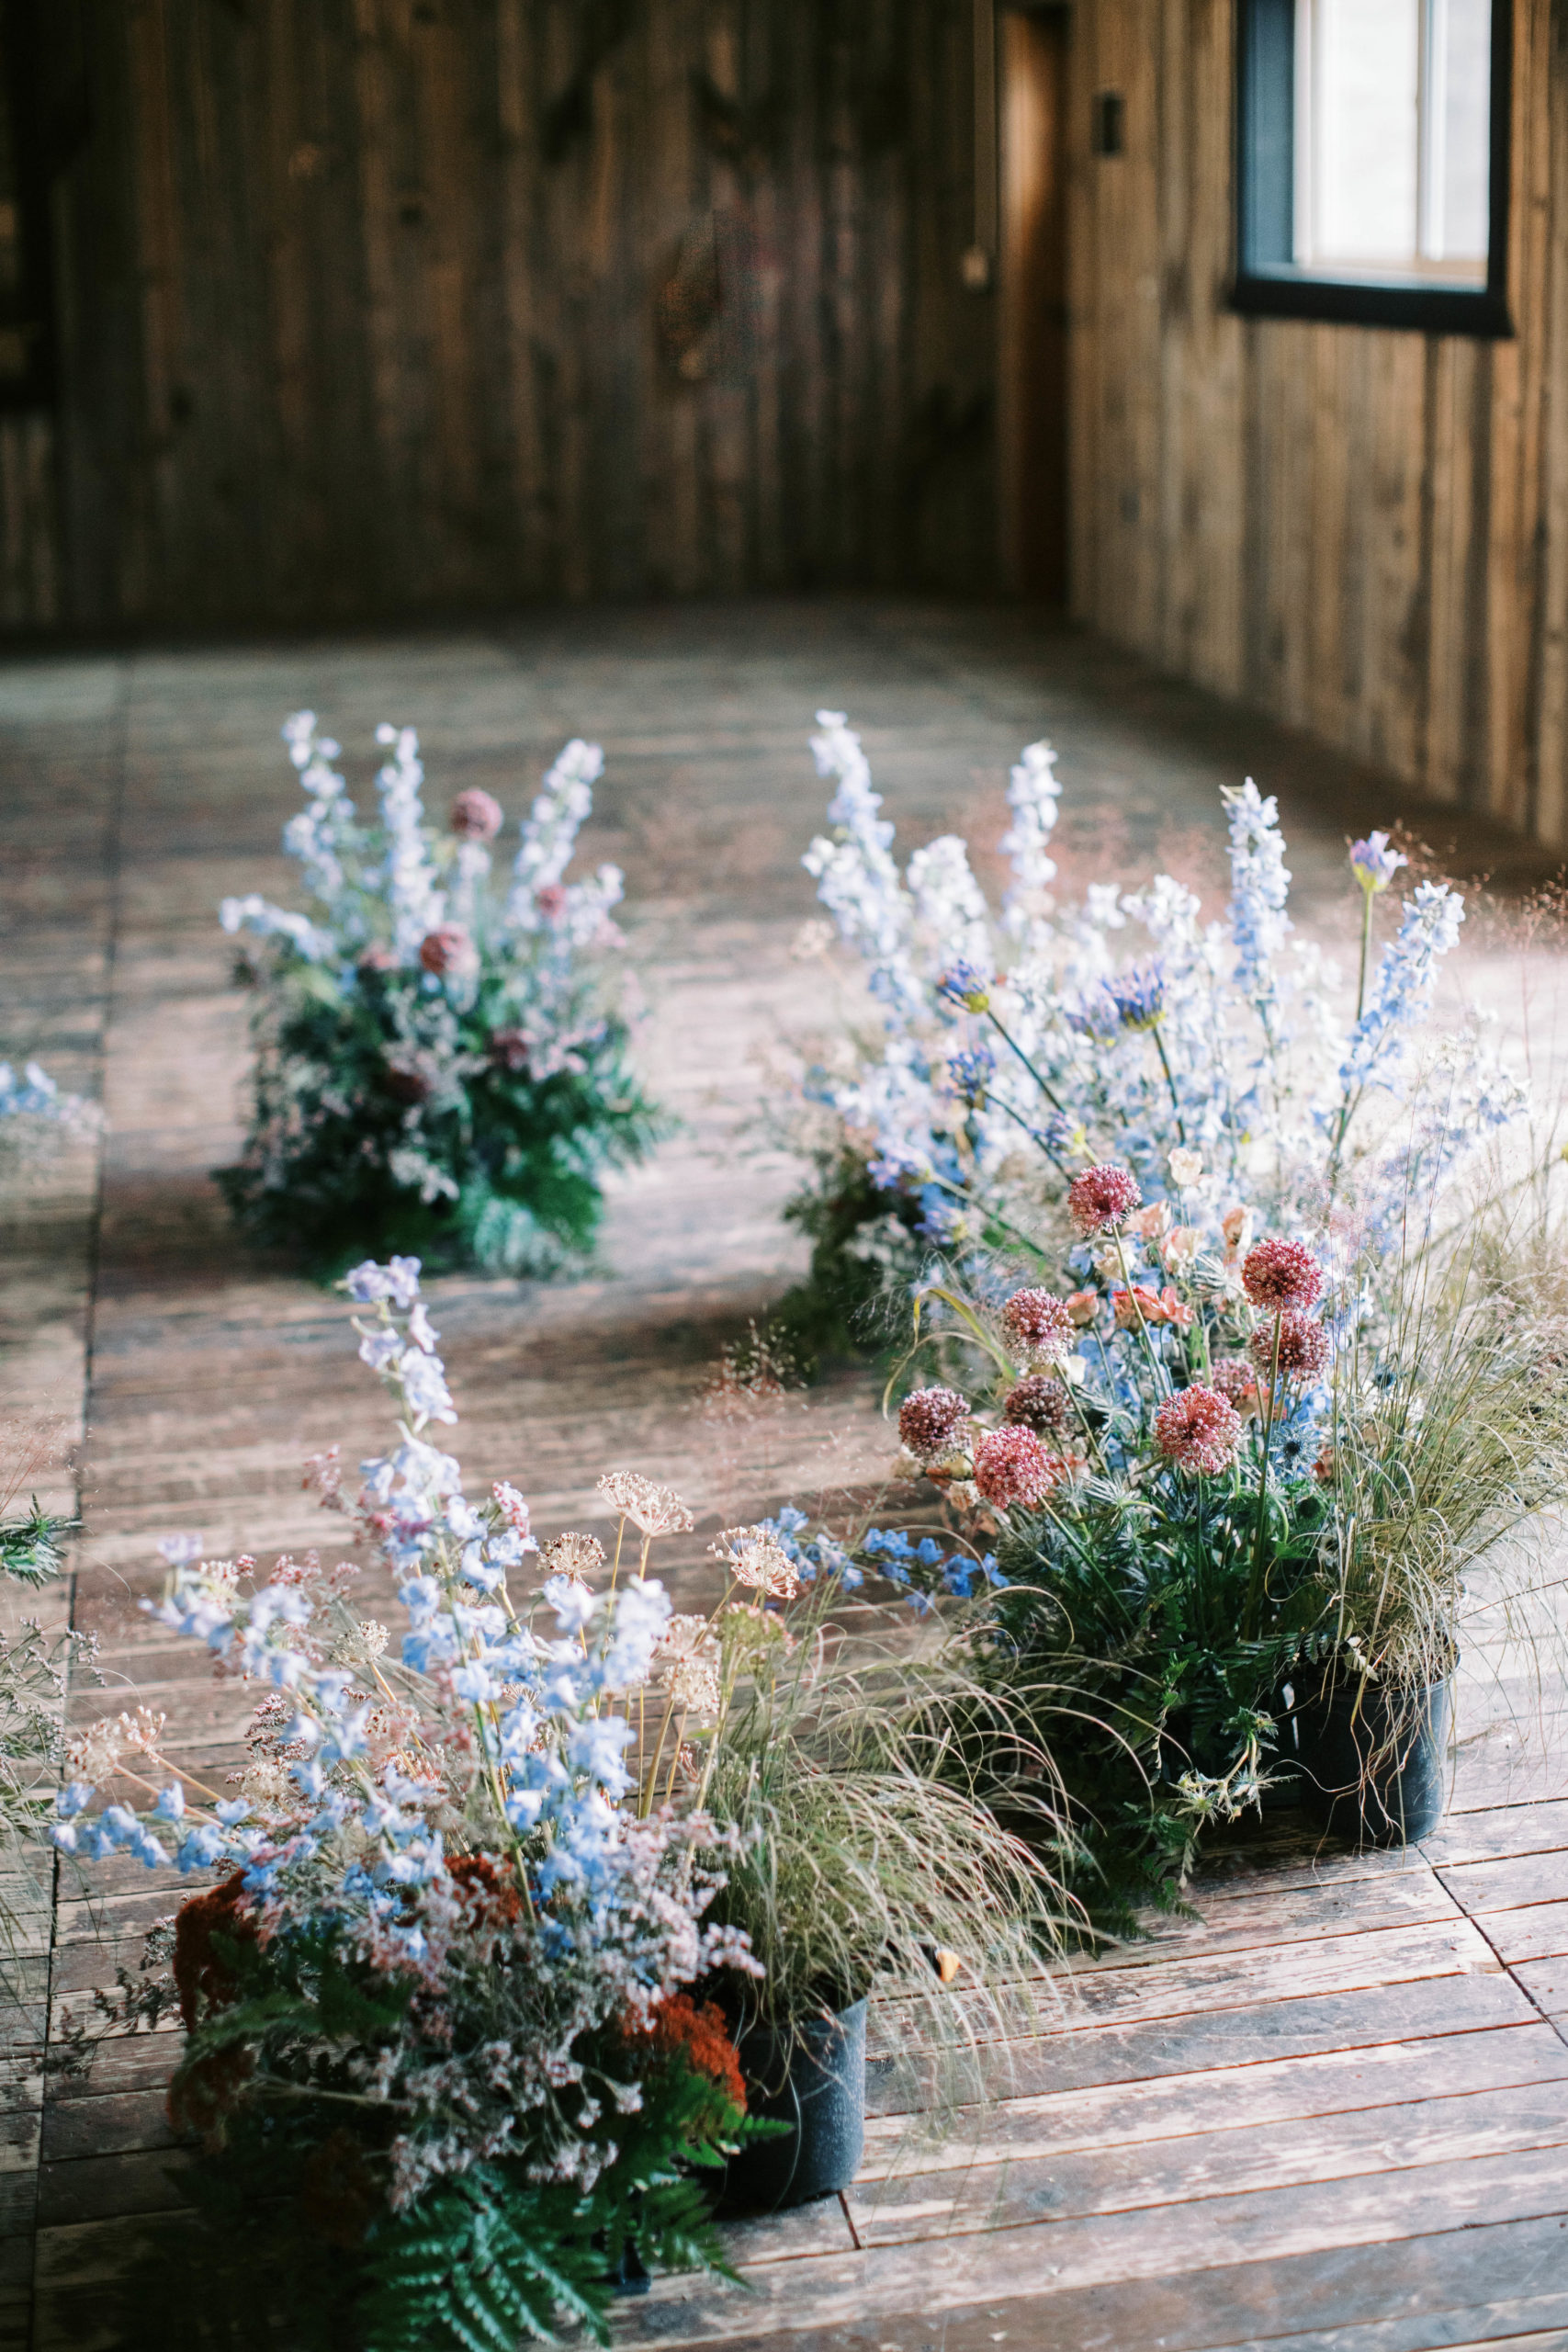 wildflower wedding ceremony flowers frame the altar at an eclectic blue sky ranch wedding in utah. photo taken by megan robinson photography